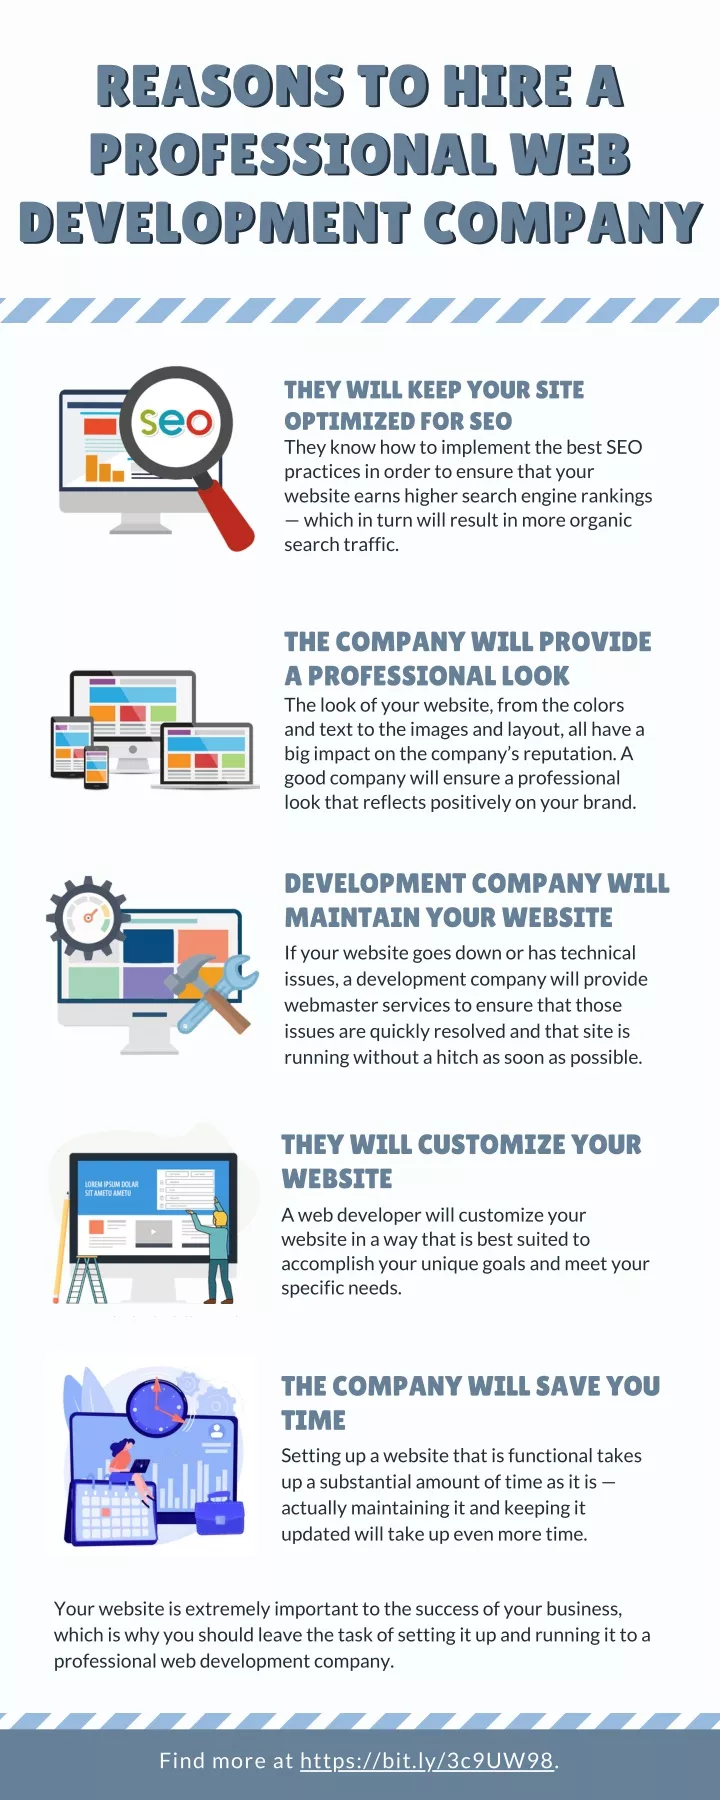 reasons to hire a professional web